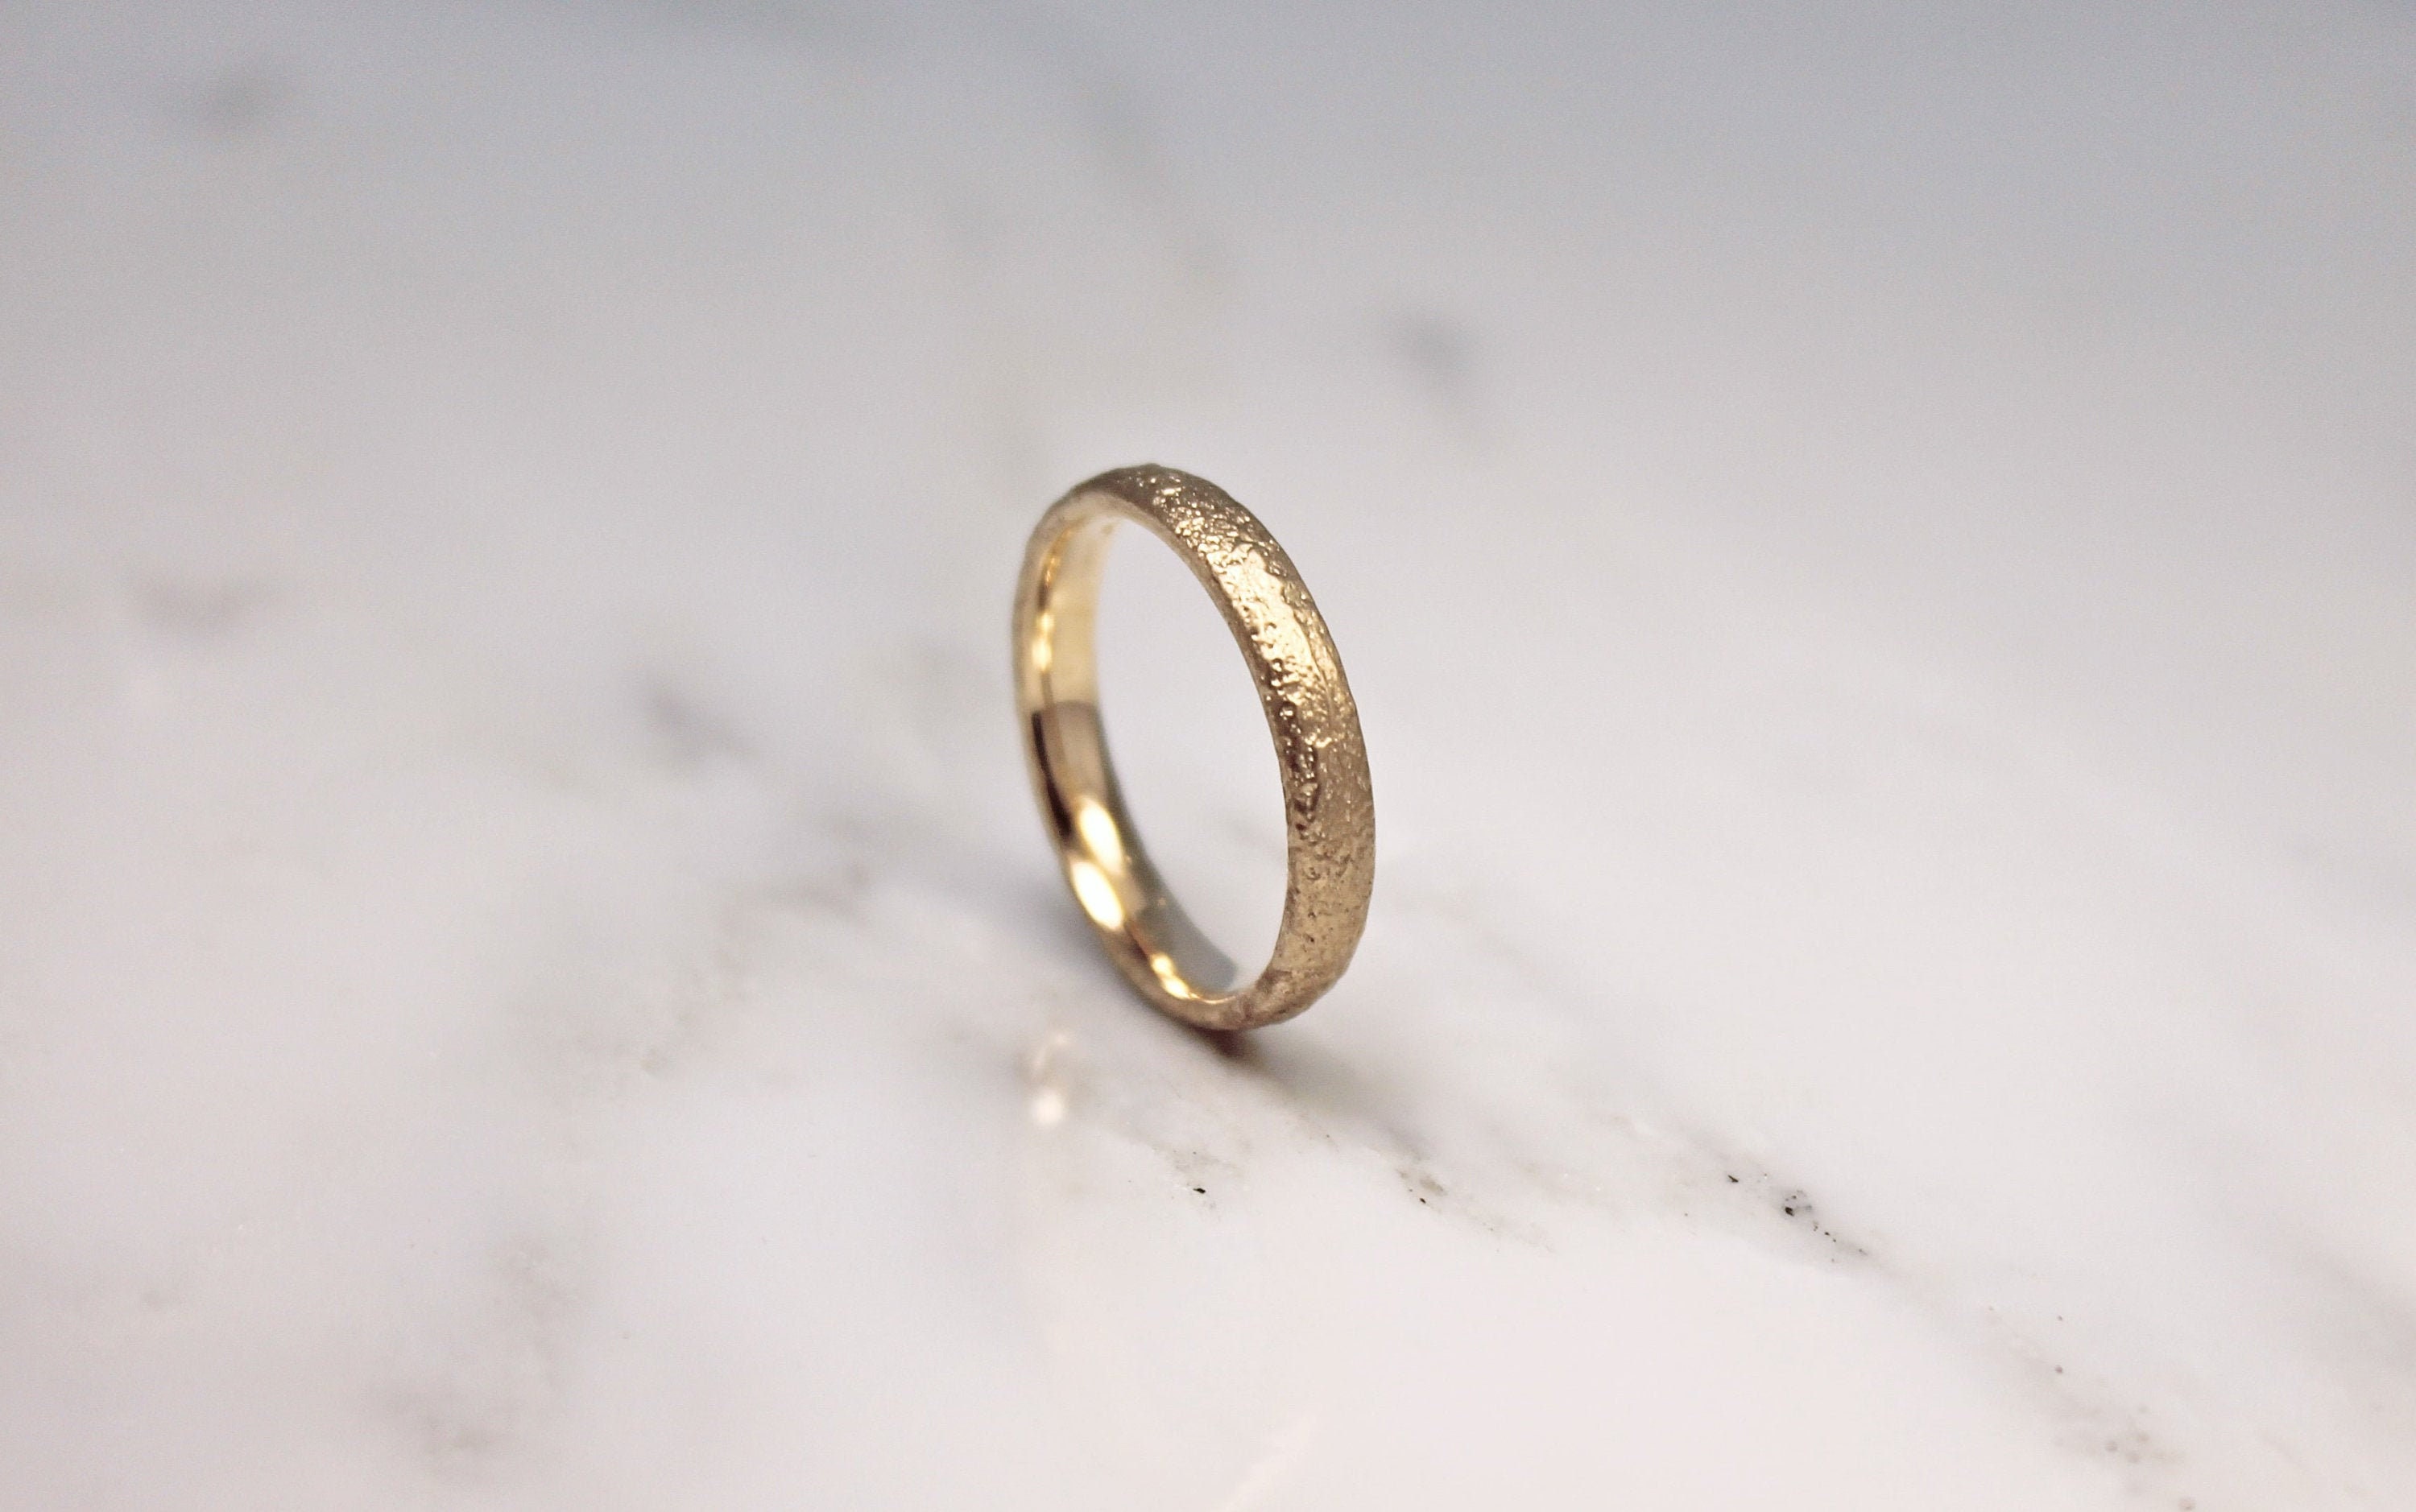 Sand Cast Ring, Textured Band, Thin 9Ct Yellow Ring By Woodengold